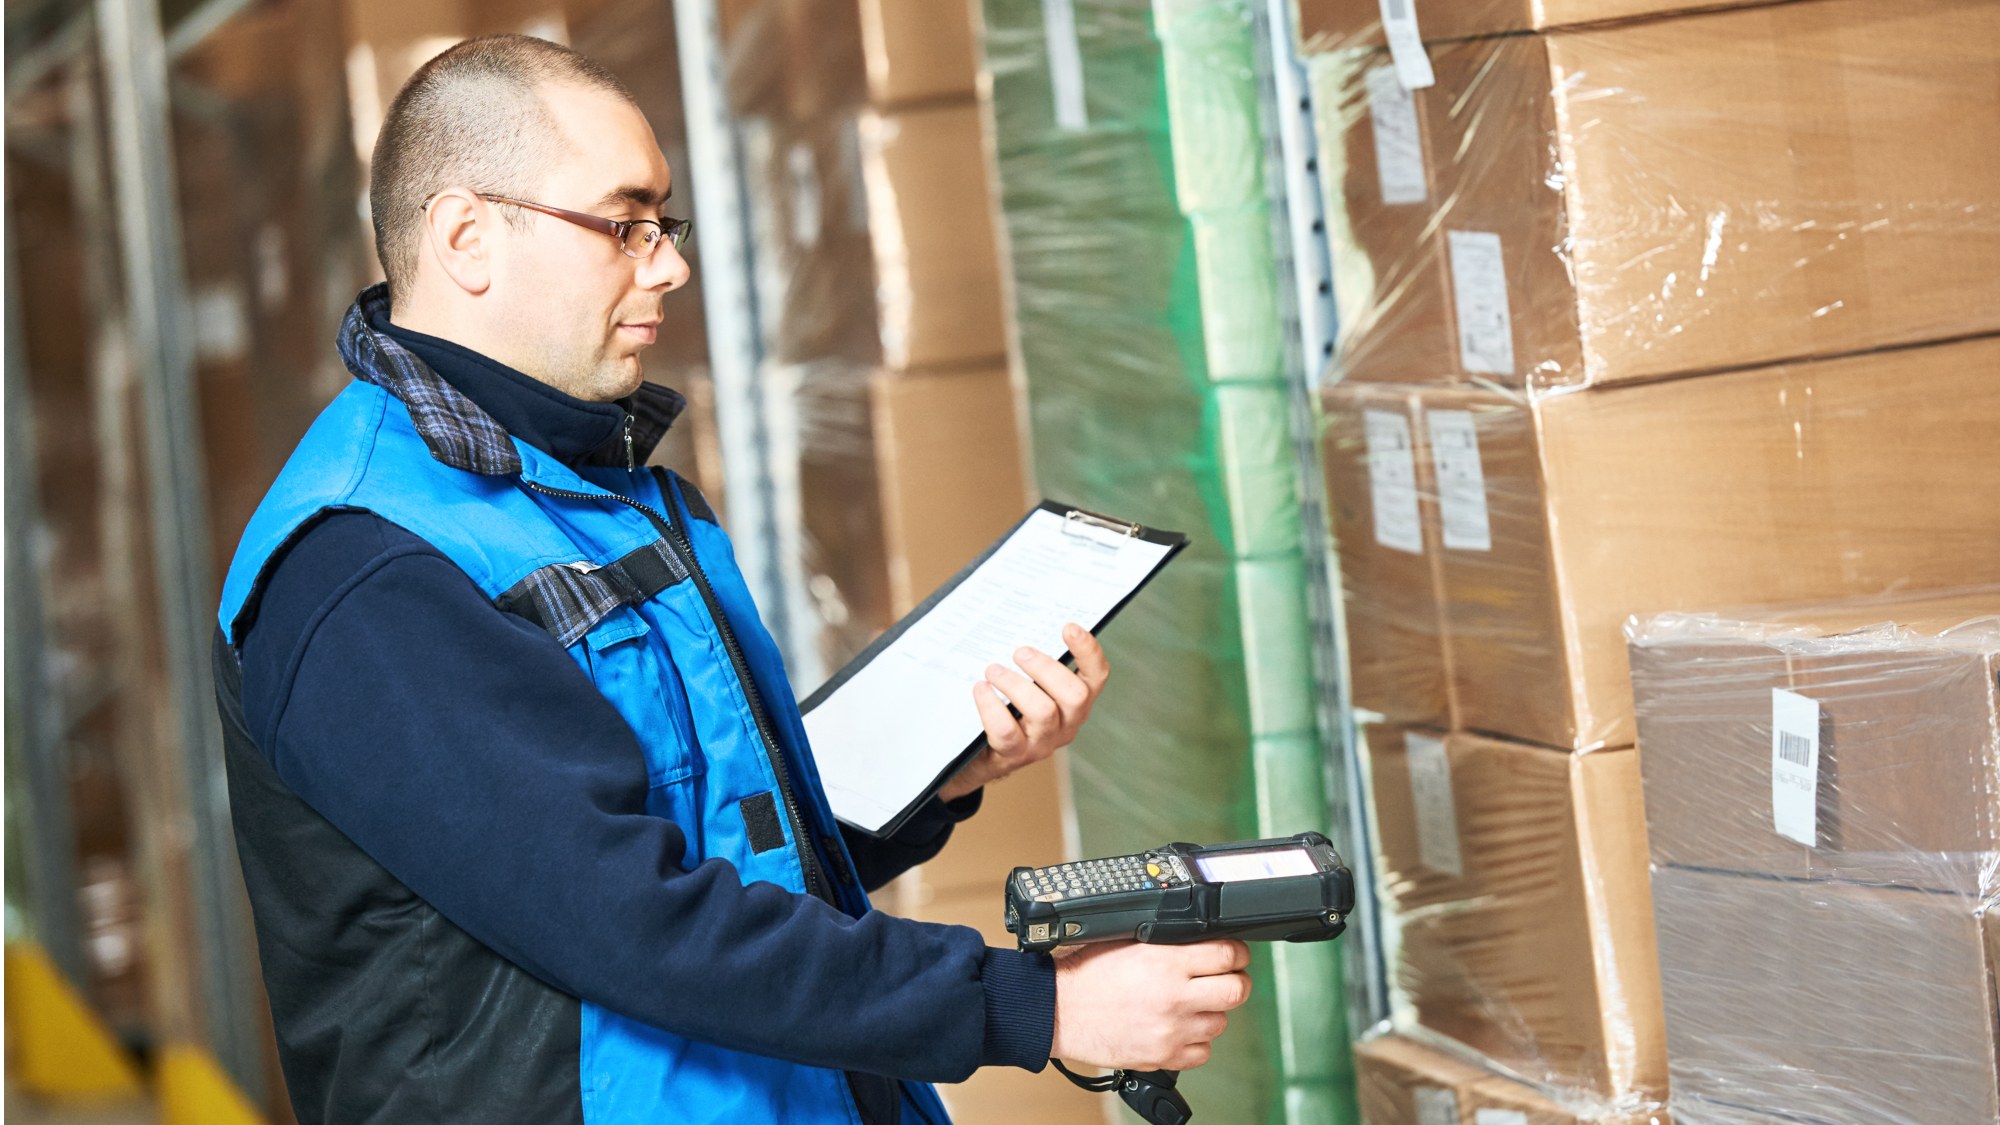 Male Worker Scanning Package With Barcode Scanner In Modern Warehouse